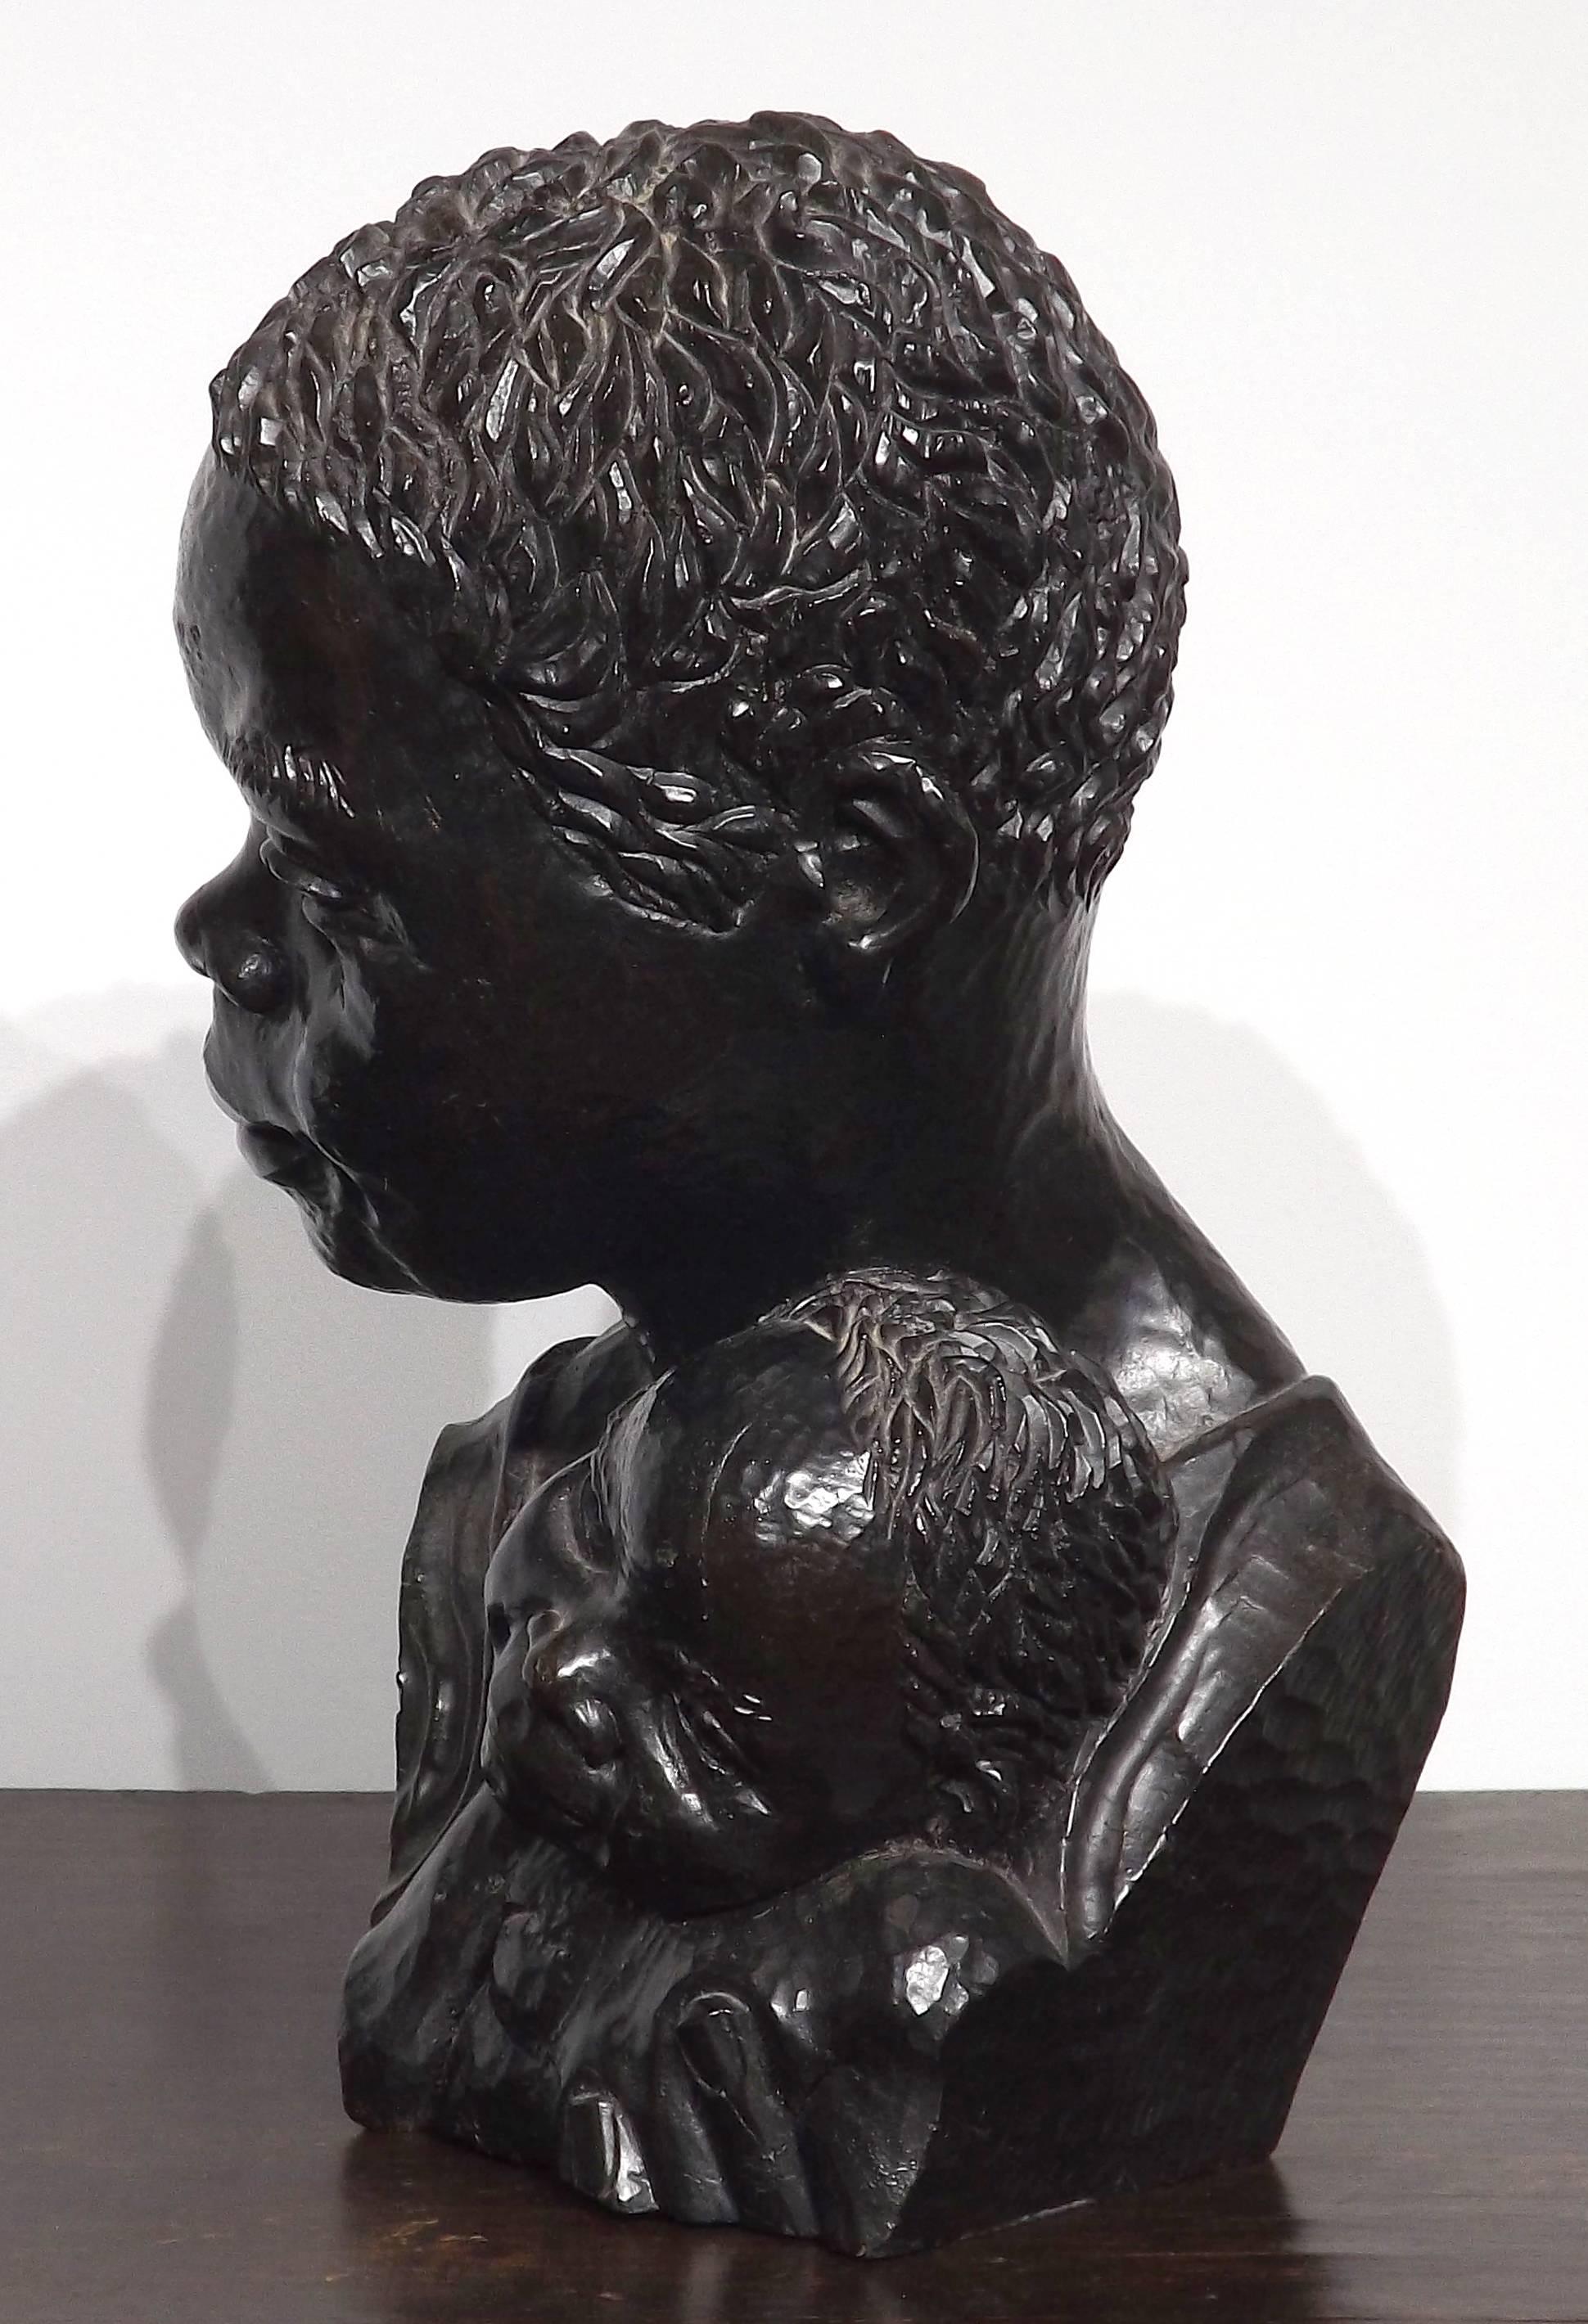 A beautifully carved wooden sculpture by African artist Canaan Chikumbirike. Signed and dated '11-1-1977' on base. Stands 12 1/2 inches tall.

Canaan Chikumbirike was born with his younger twin brother on the 7th of October 1954 to a farming